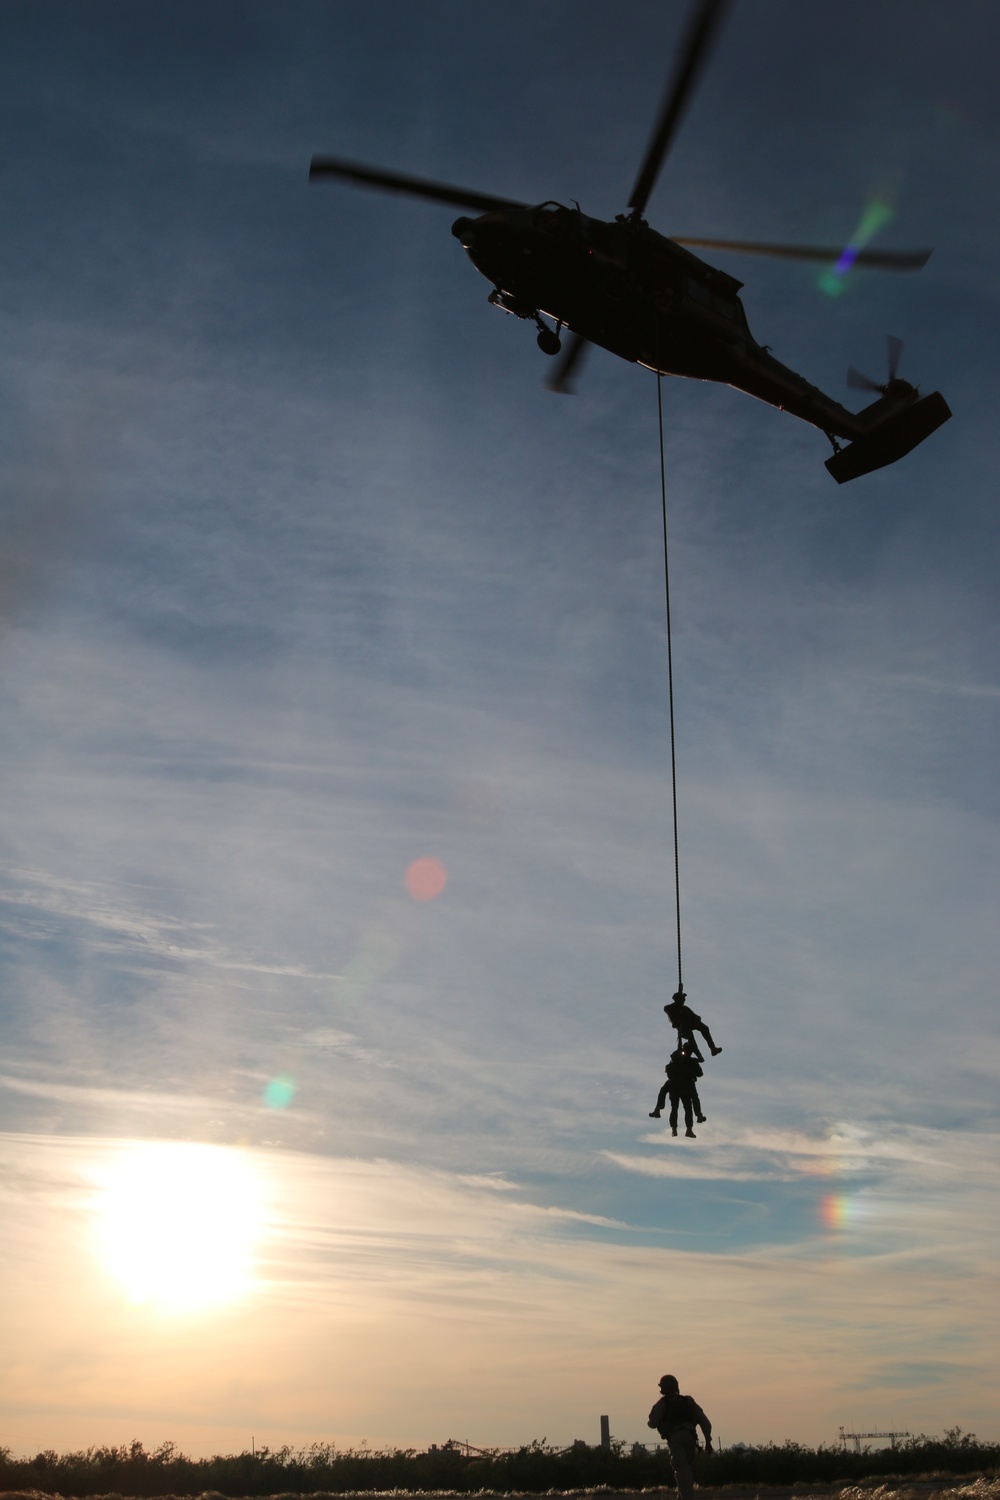 Air and Marine Operations (AMO) Joint Operations with Tucson Police Department SWAT